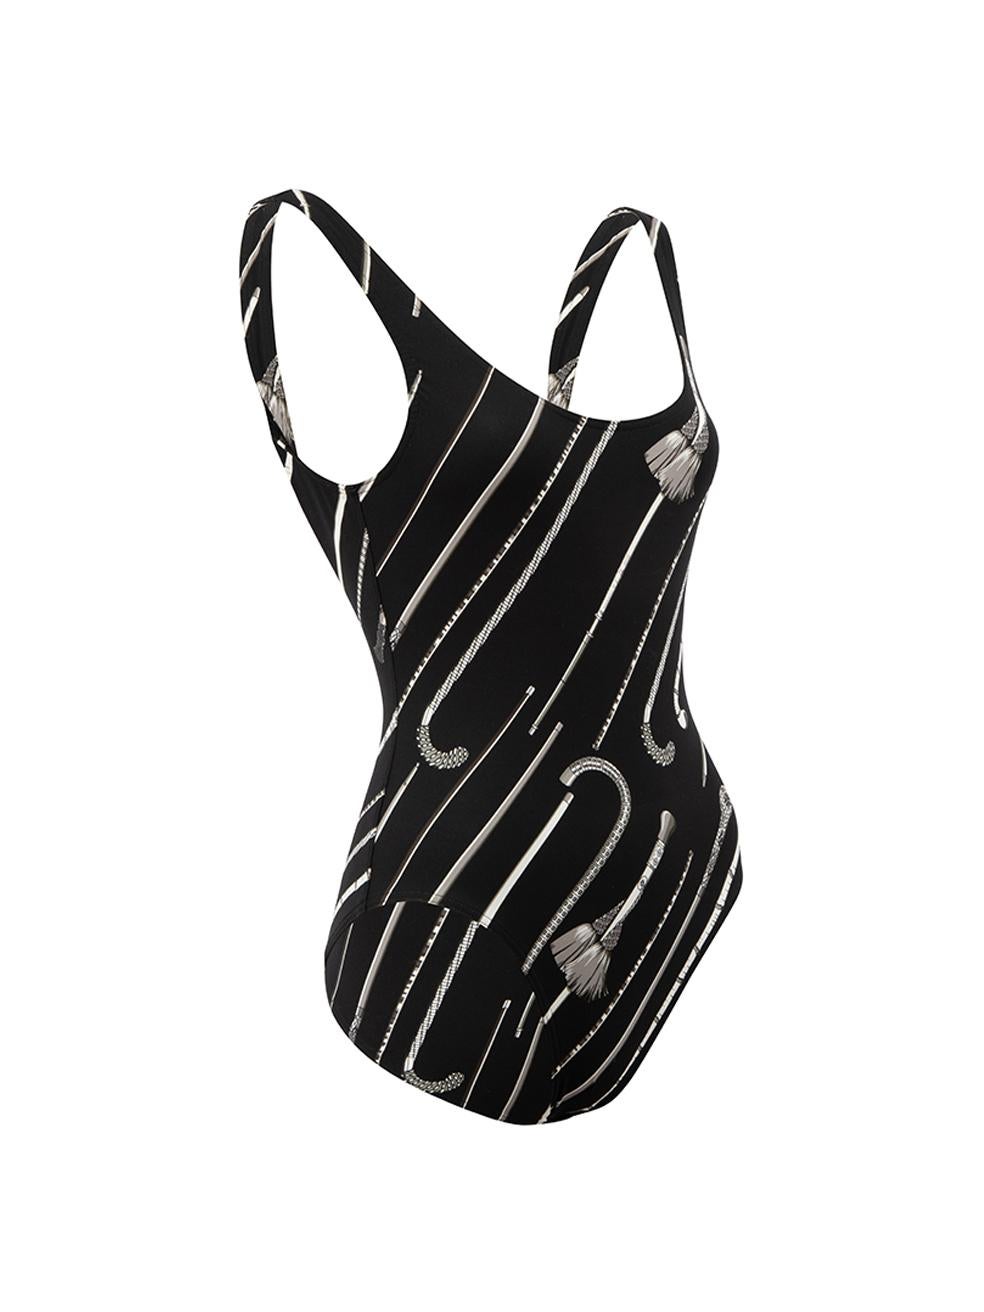 CONDITION is Never worn, with tags. No visible wear to swimsuit is evident on this new Hermès designer resale item.
  
  Details
  Black
  Synthetic
  Swimsuit
  Tassel and cane print
  Round neckline
  
  Made in France
  
  Composition
  62%